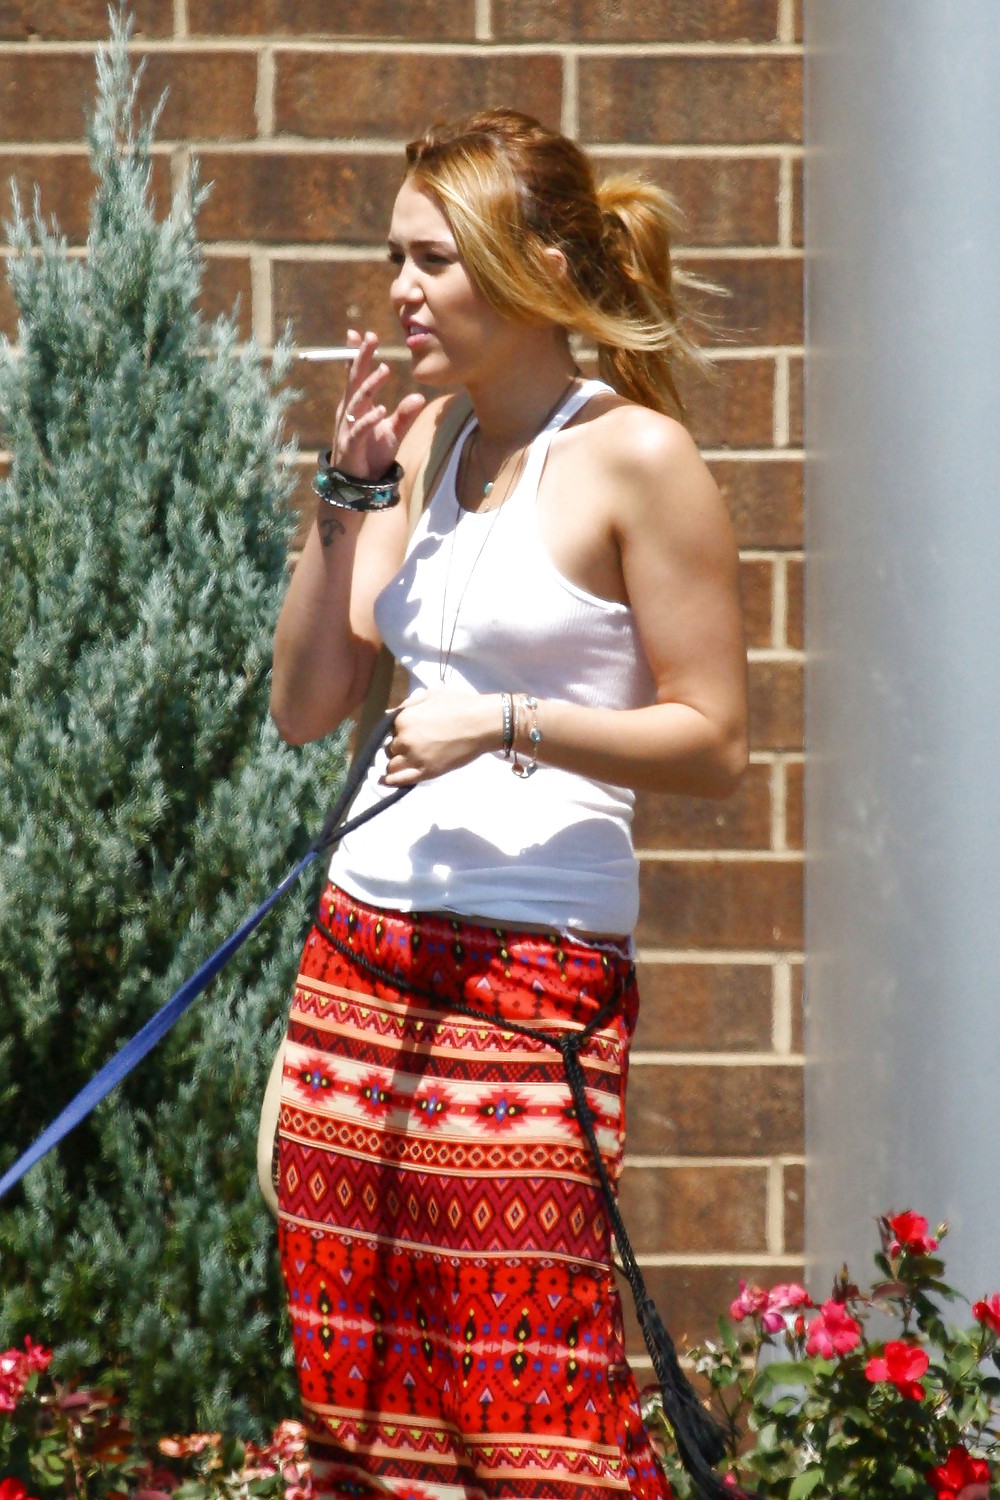 Miley cyrus braless candids in orchard lake
 #4980327